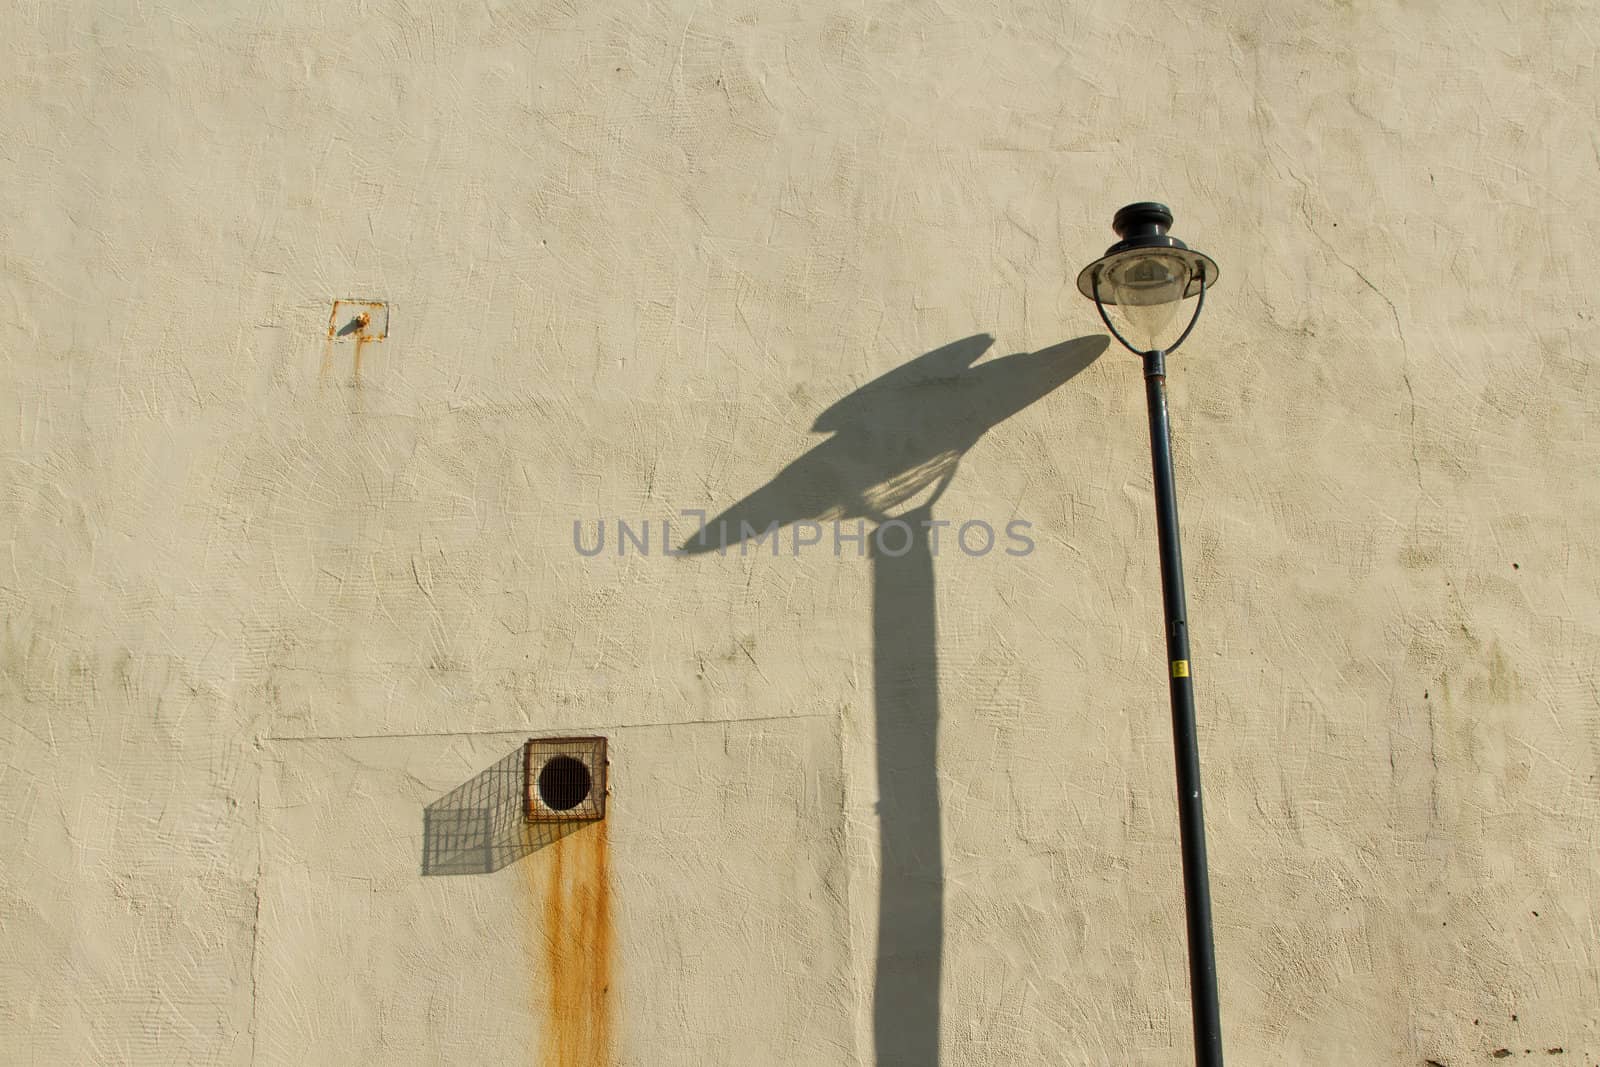 A cream painted wall with a rusty bolt and grill, rust stains and a light post with shadow.